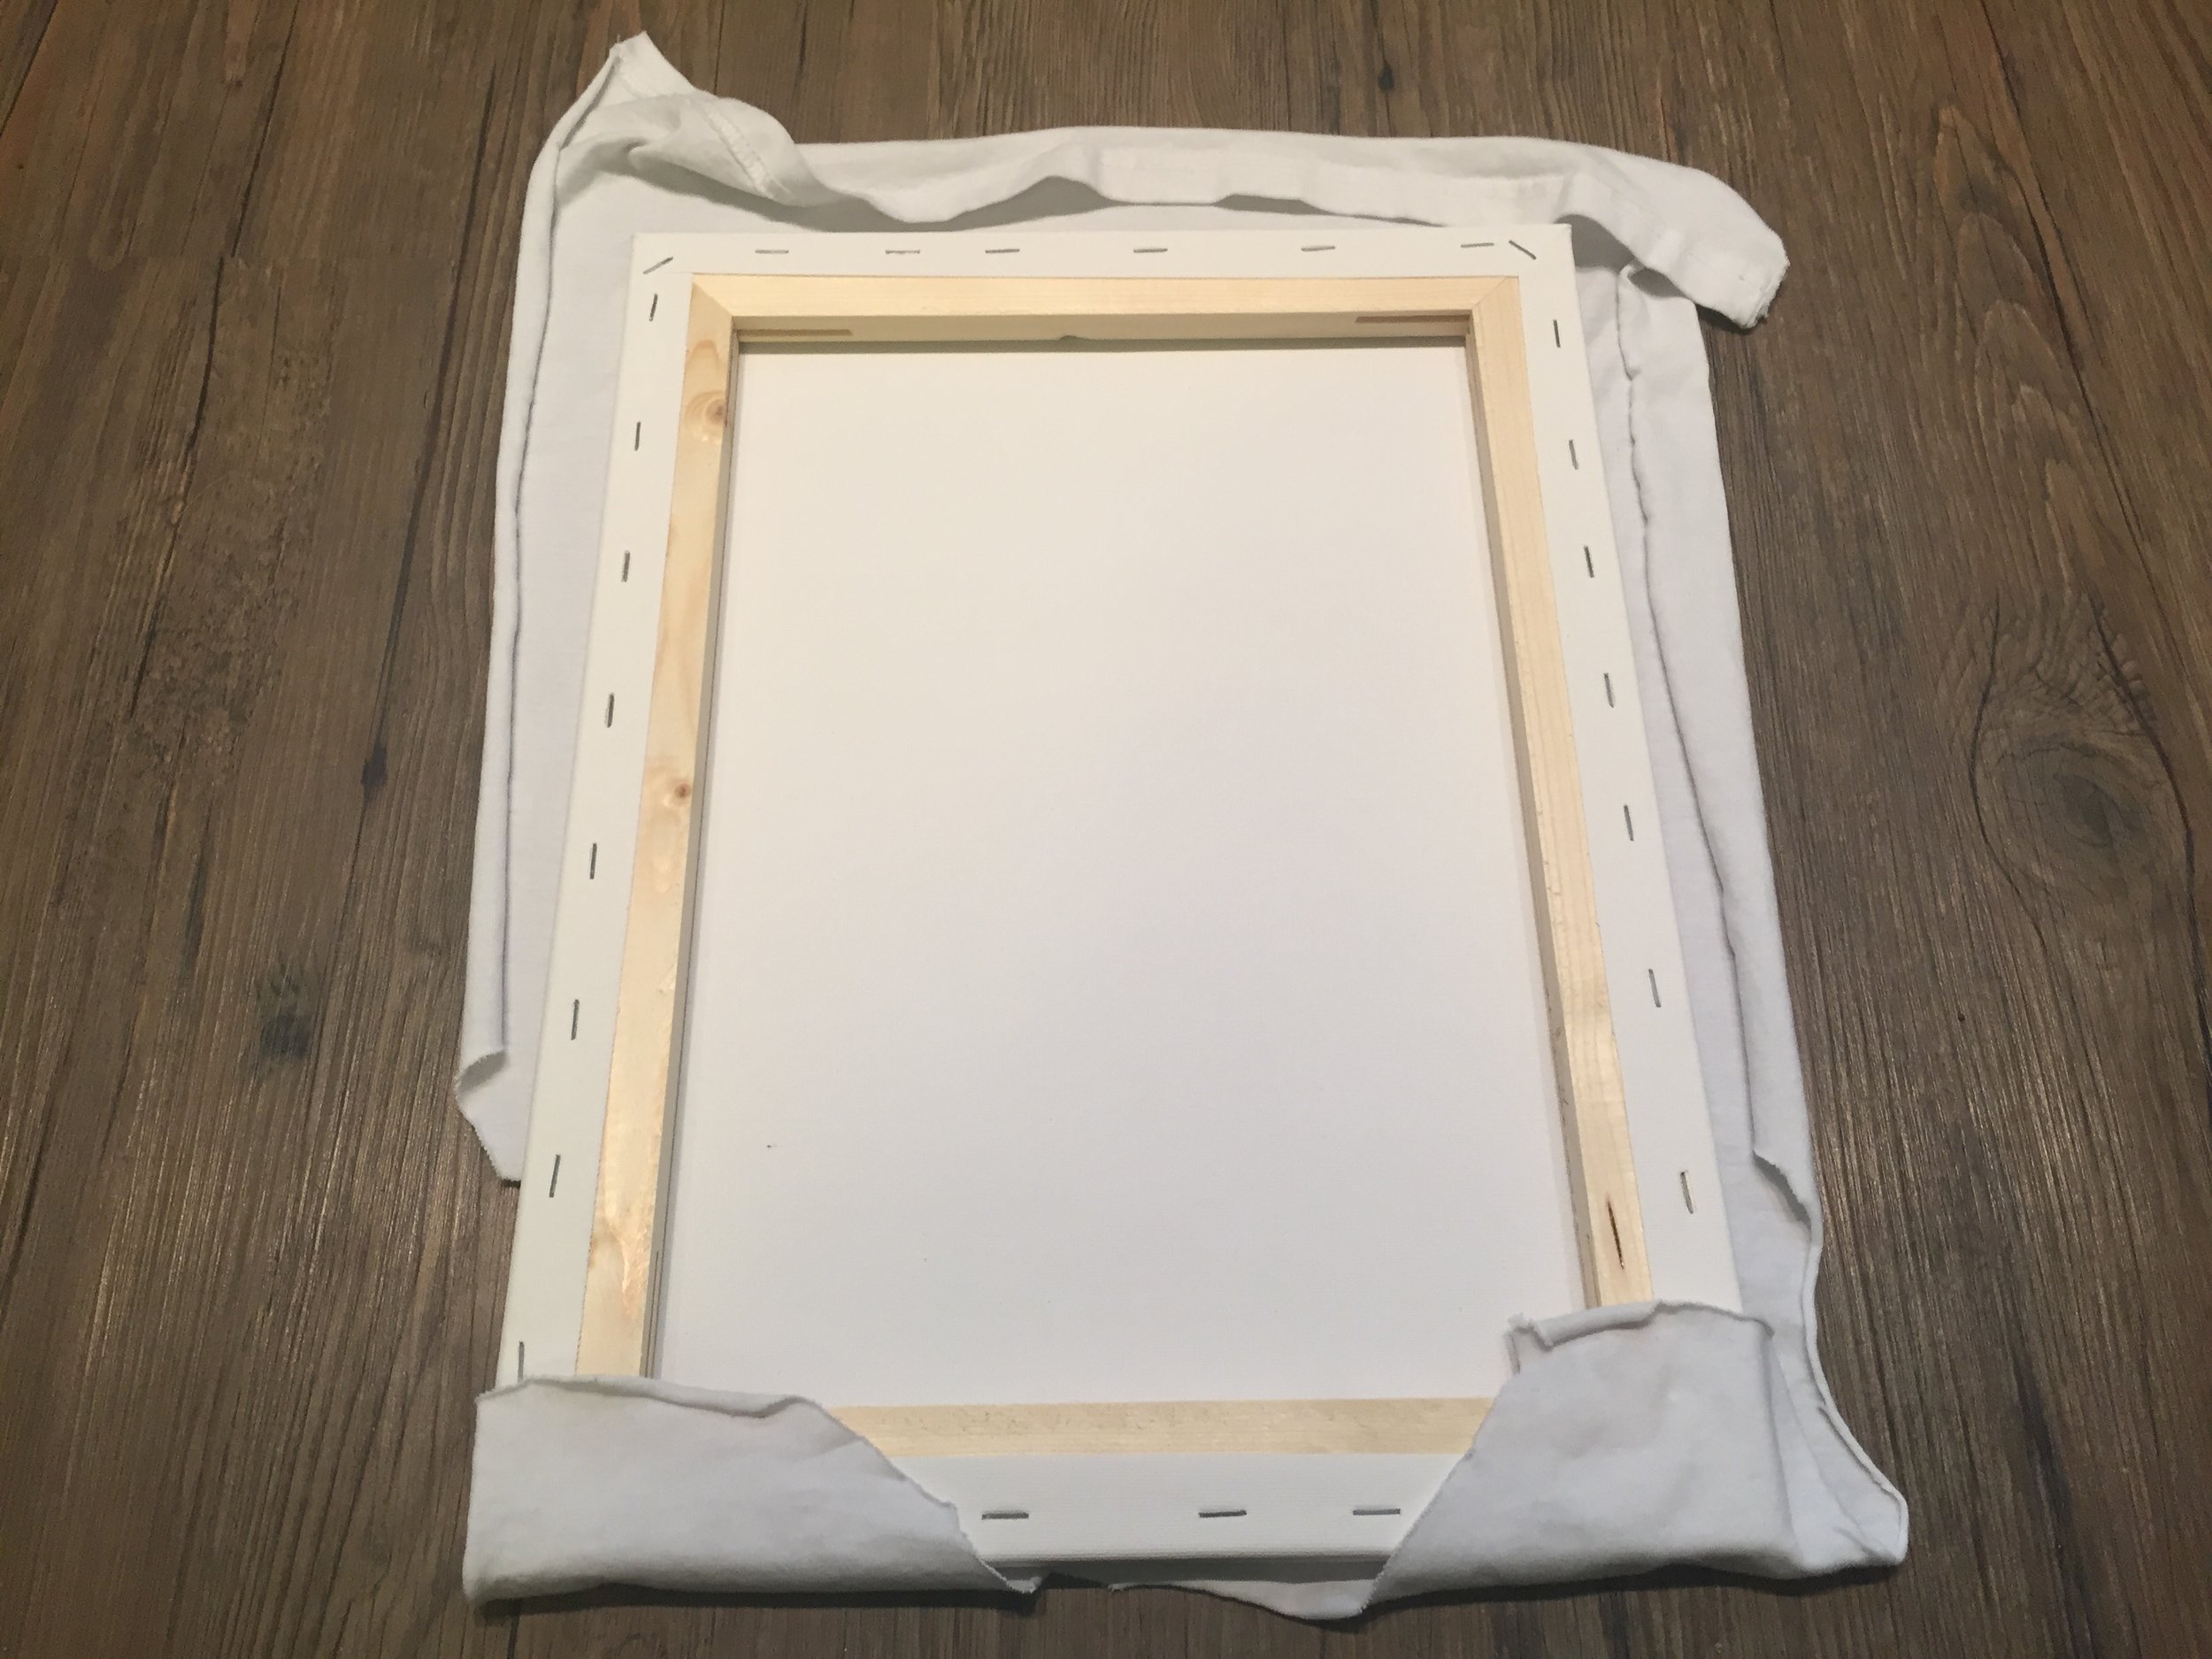 DIY Tutorial How to Turn a T Shirt into Wall Art